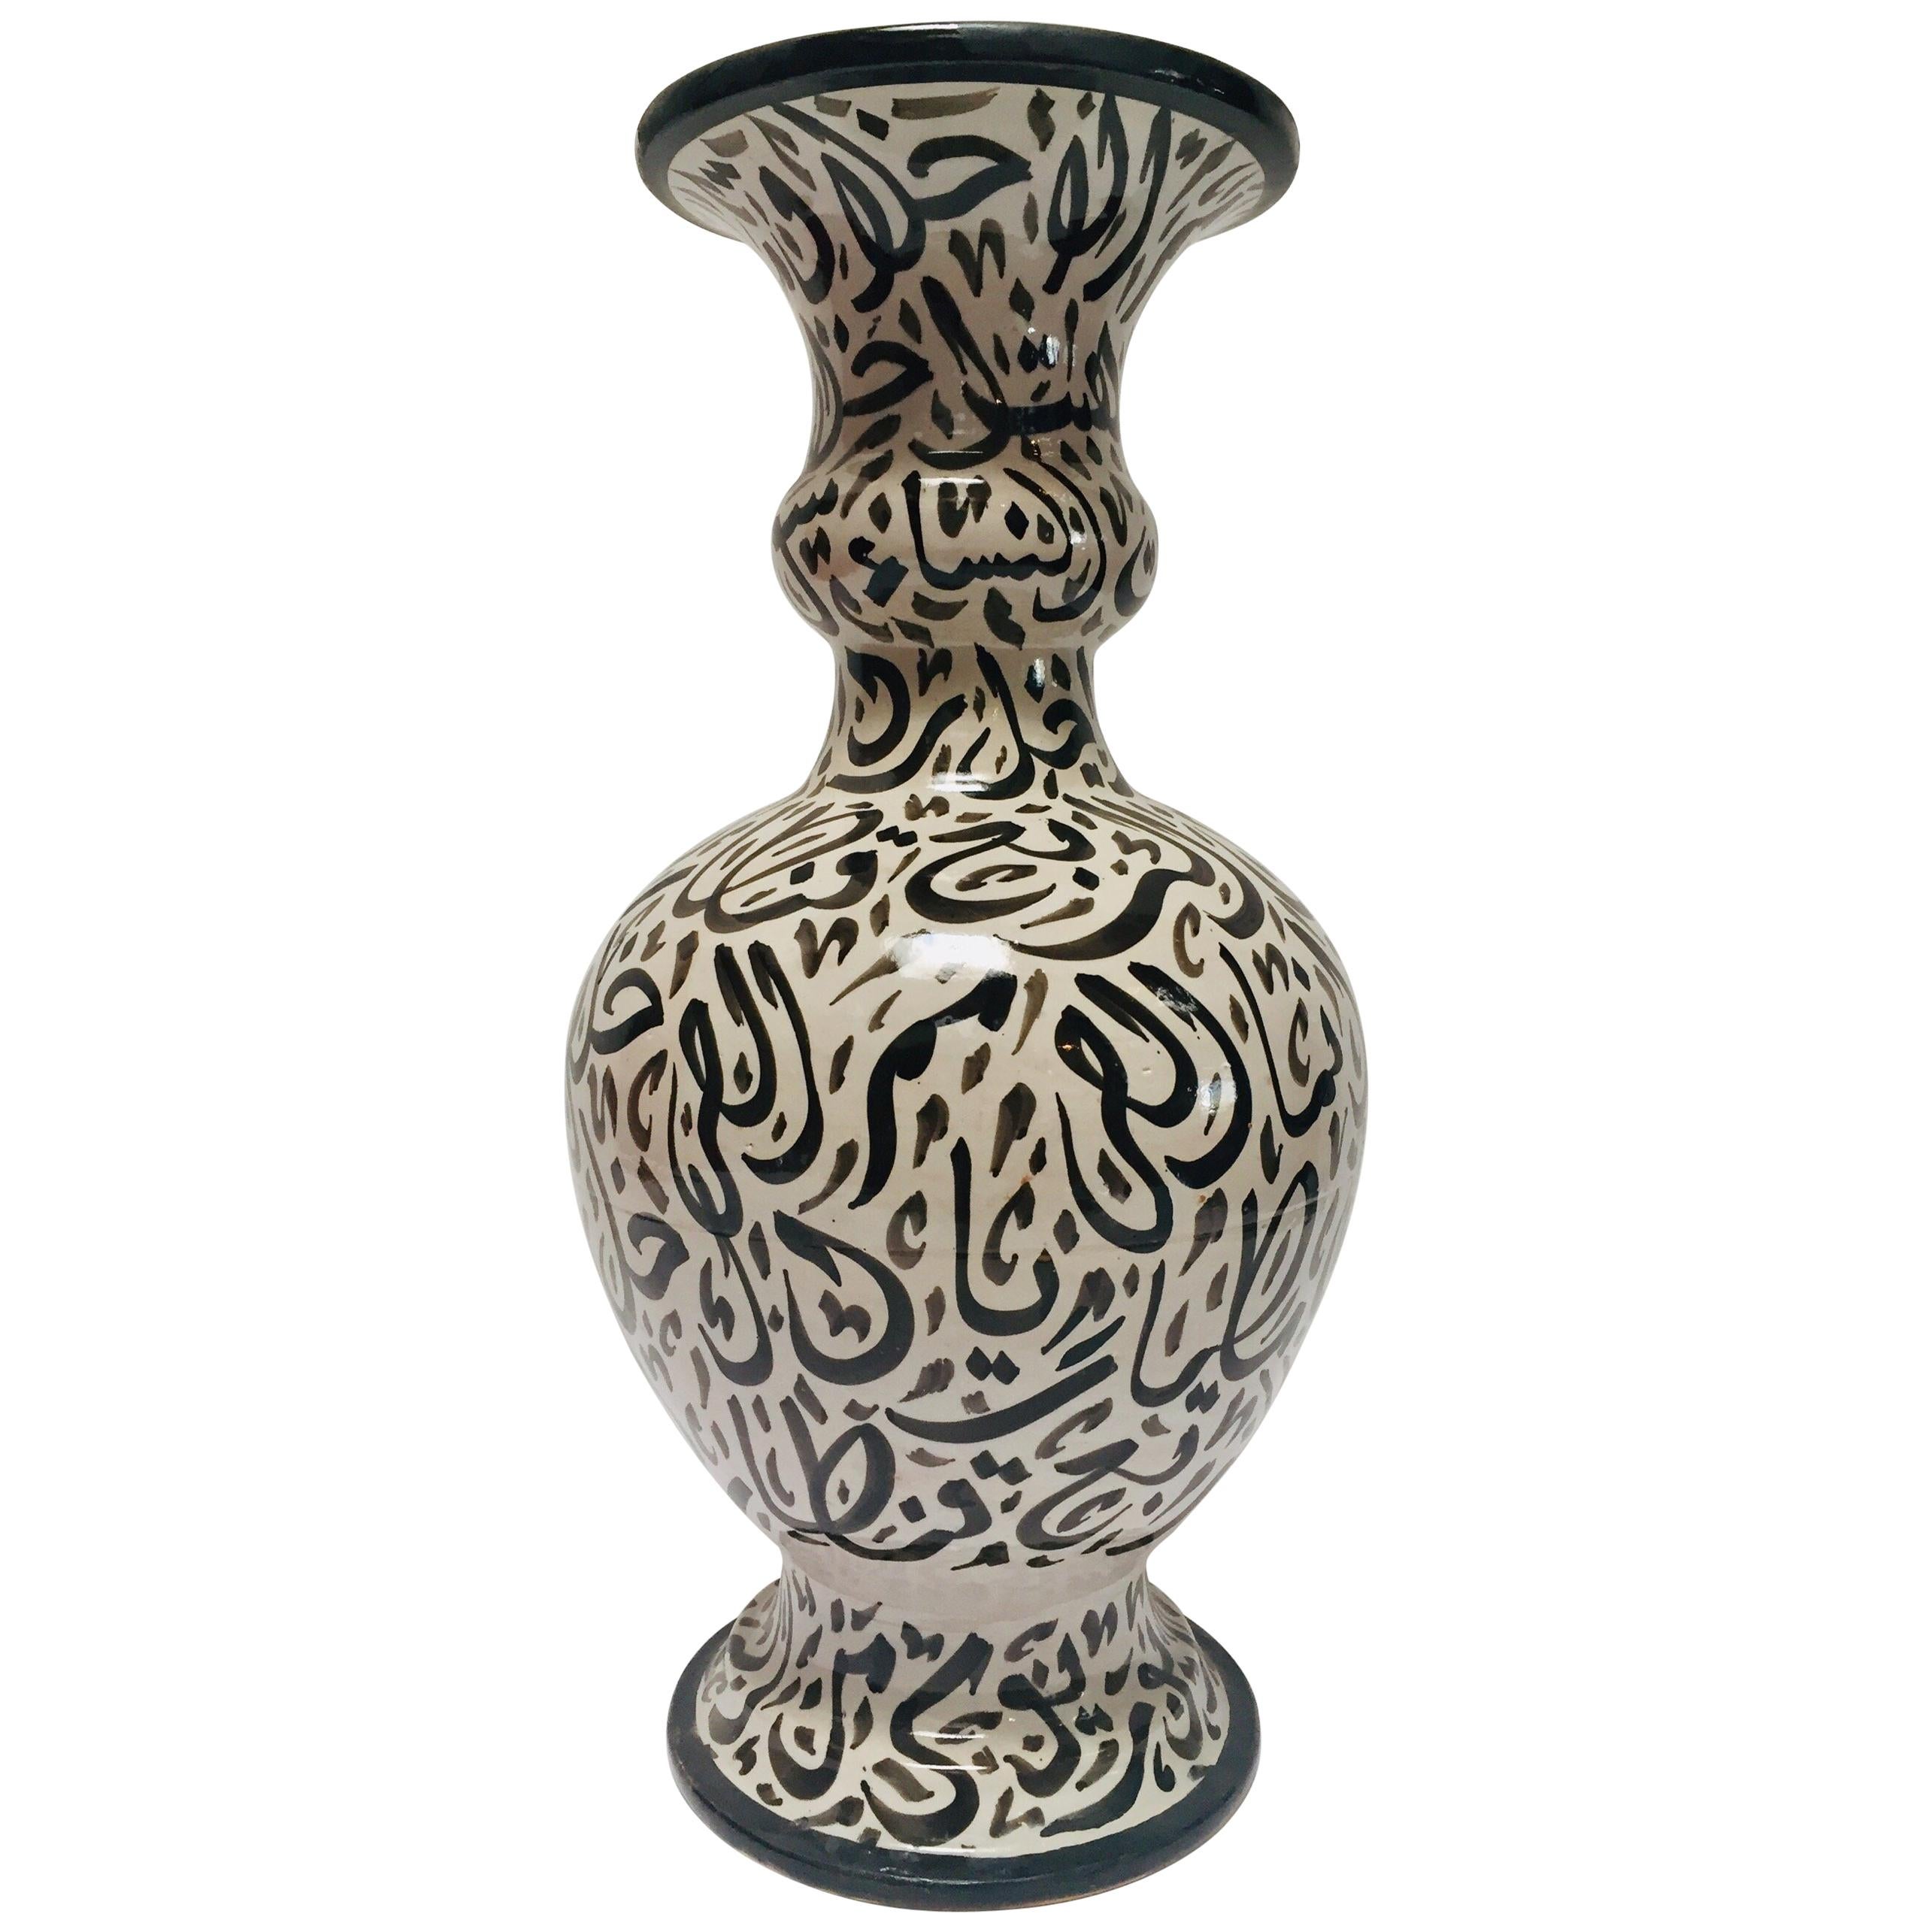 Large Moroccan Glazed Ceramic Vase with Arabic Calligraphy Brown Writing, Fez